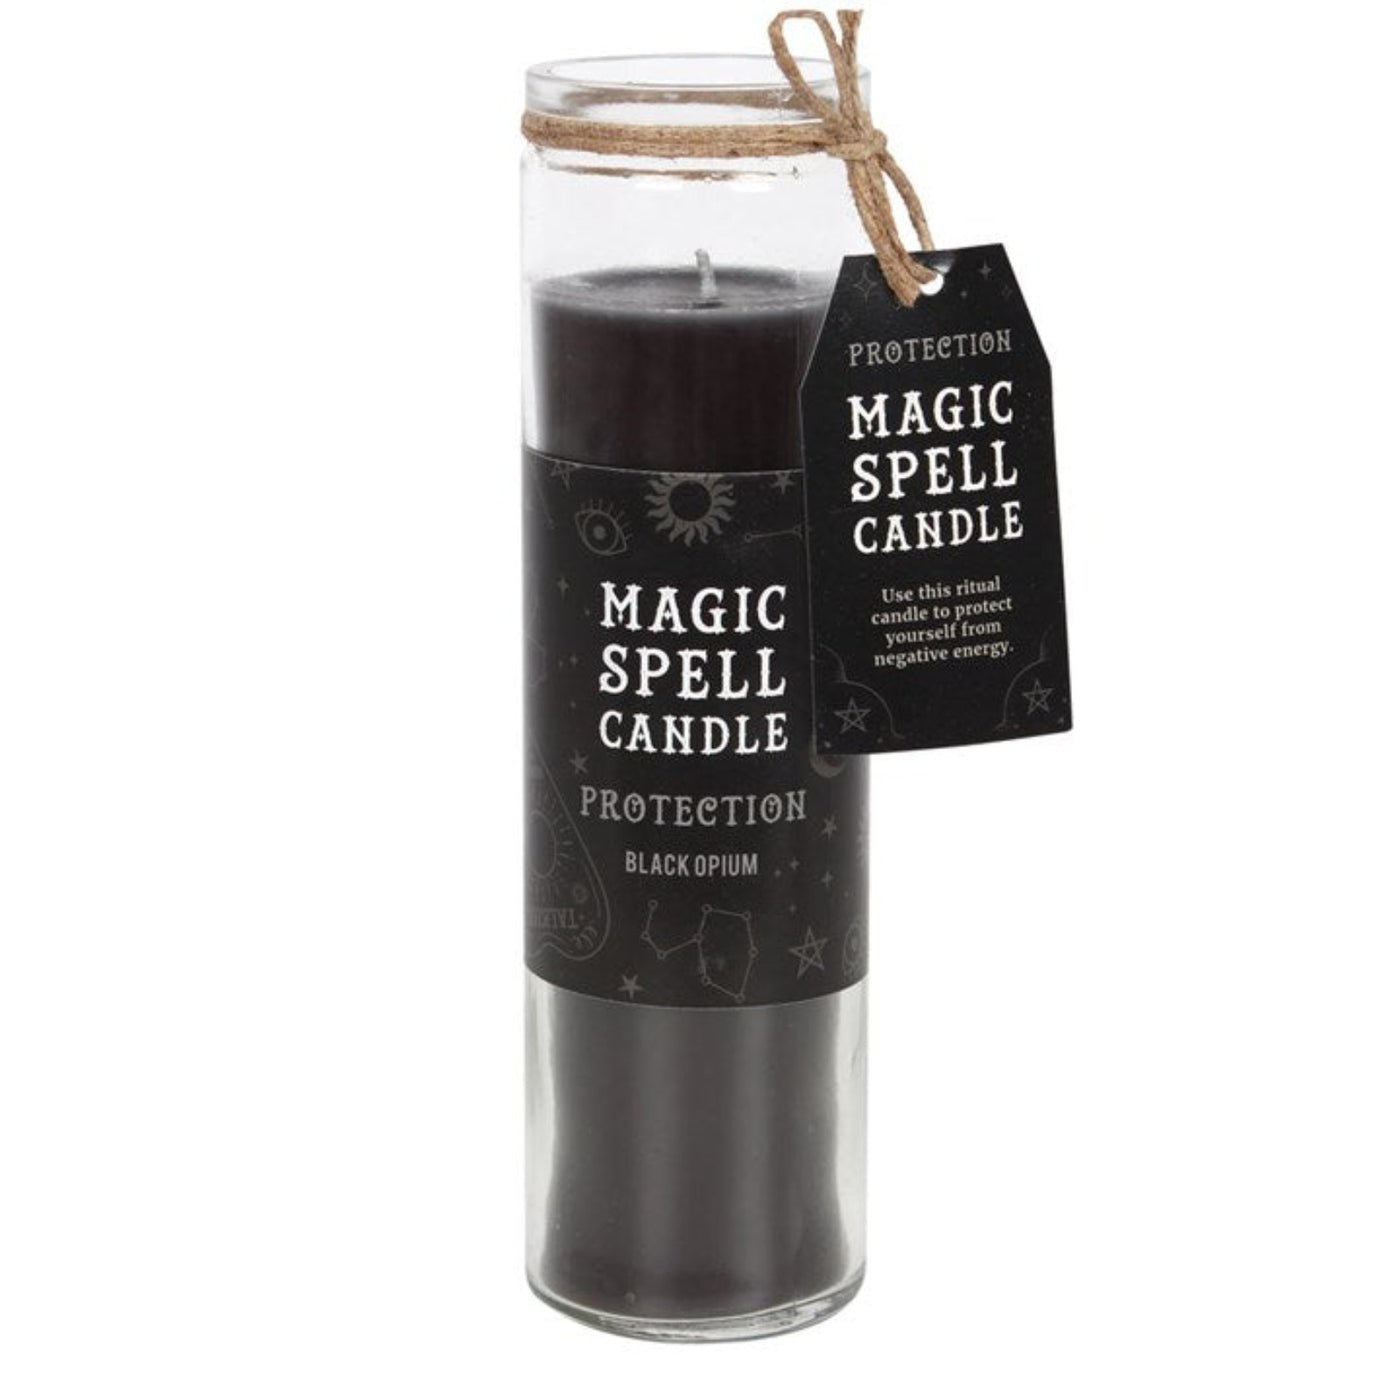 Opium 'Protection' Spell Cylinder Glass Candle.